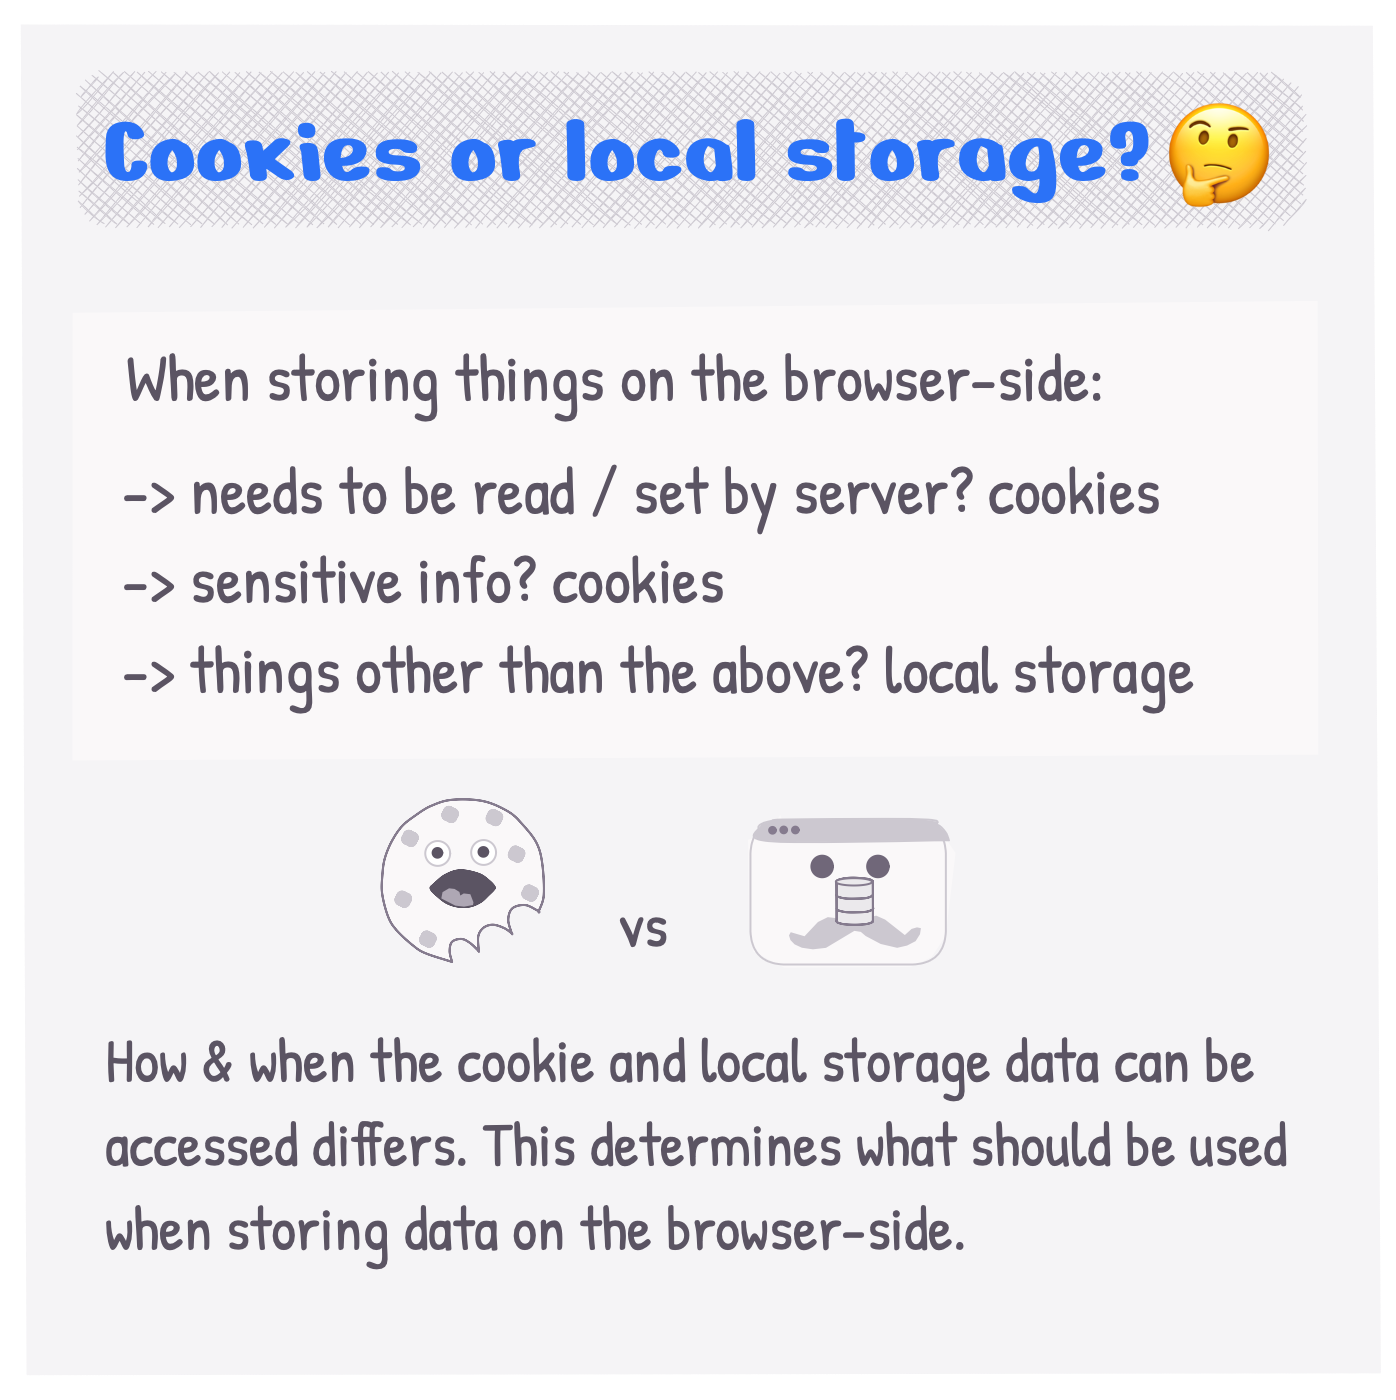 When storing stuff on the browser side, what to use when?